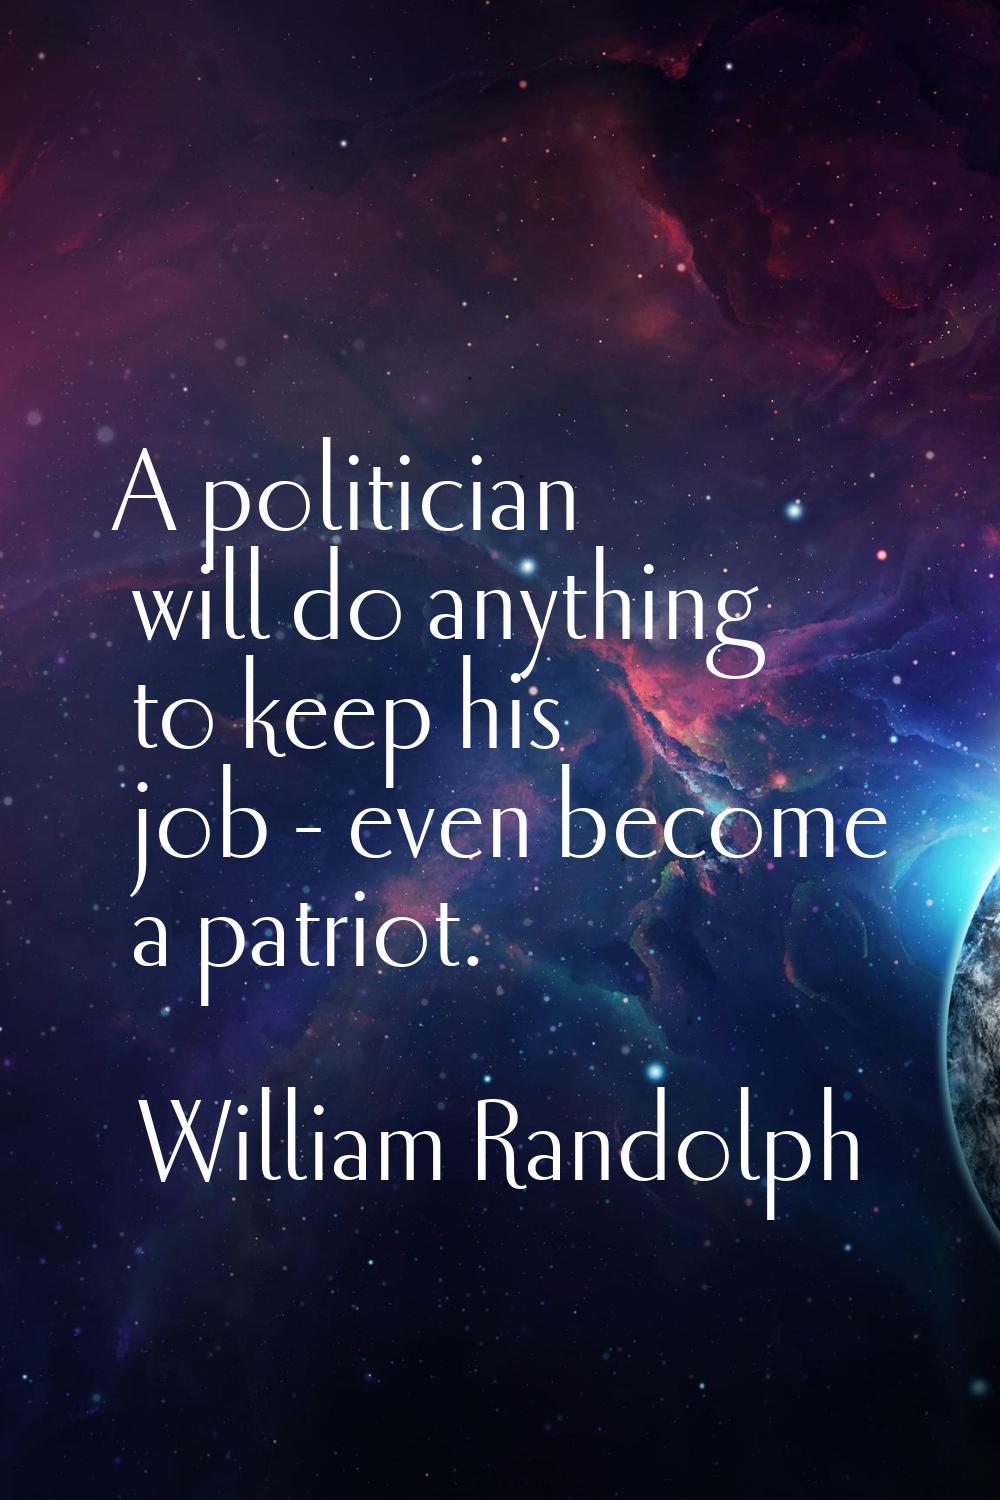 A politician will do anything to keep his job - even become a patriot.